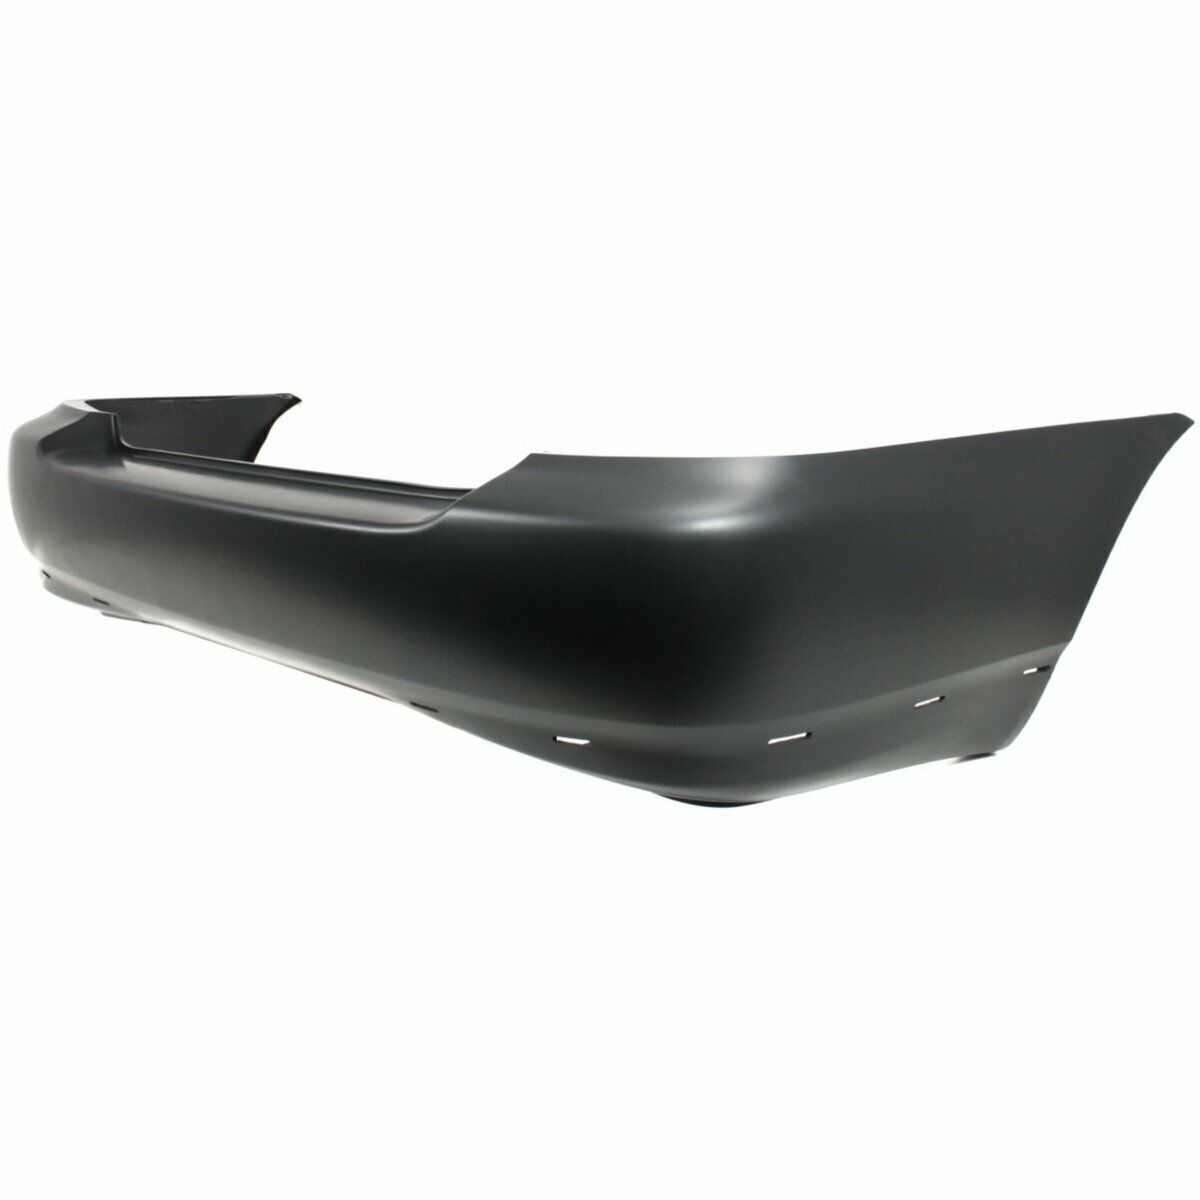 2006-2008 Toyota Corolla S Rear Bumper Painted to Match